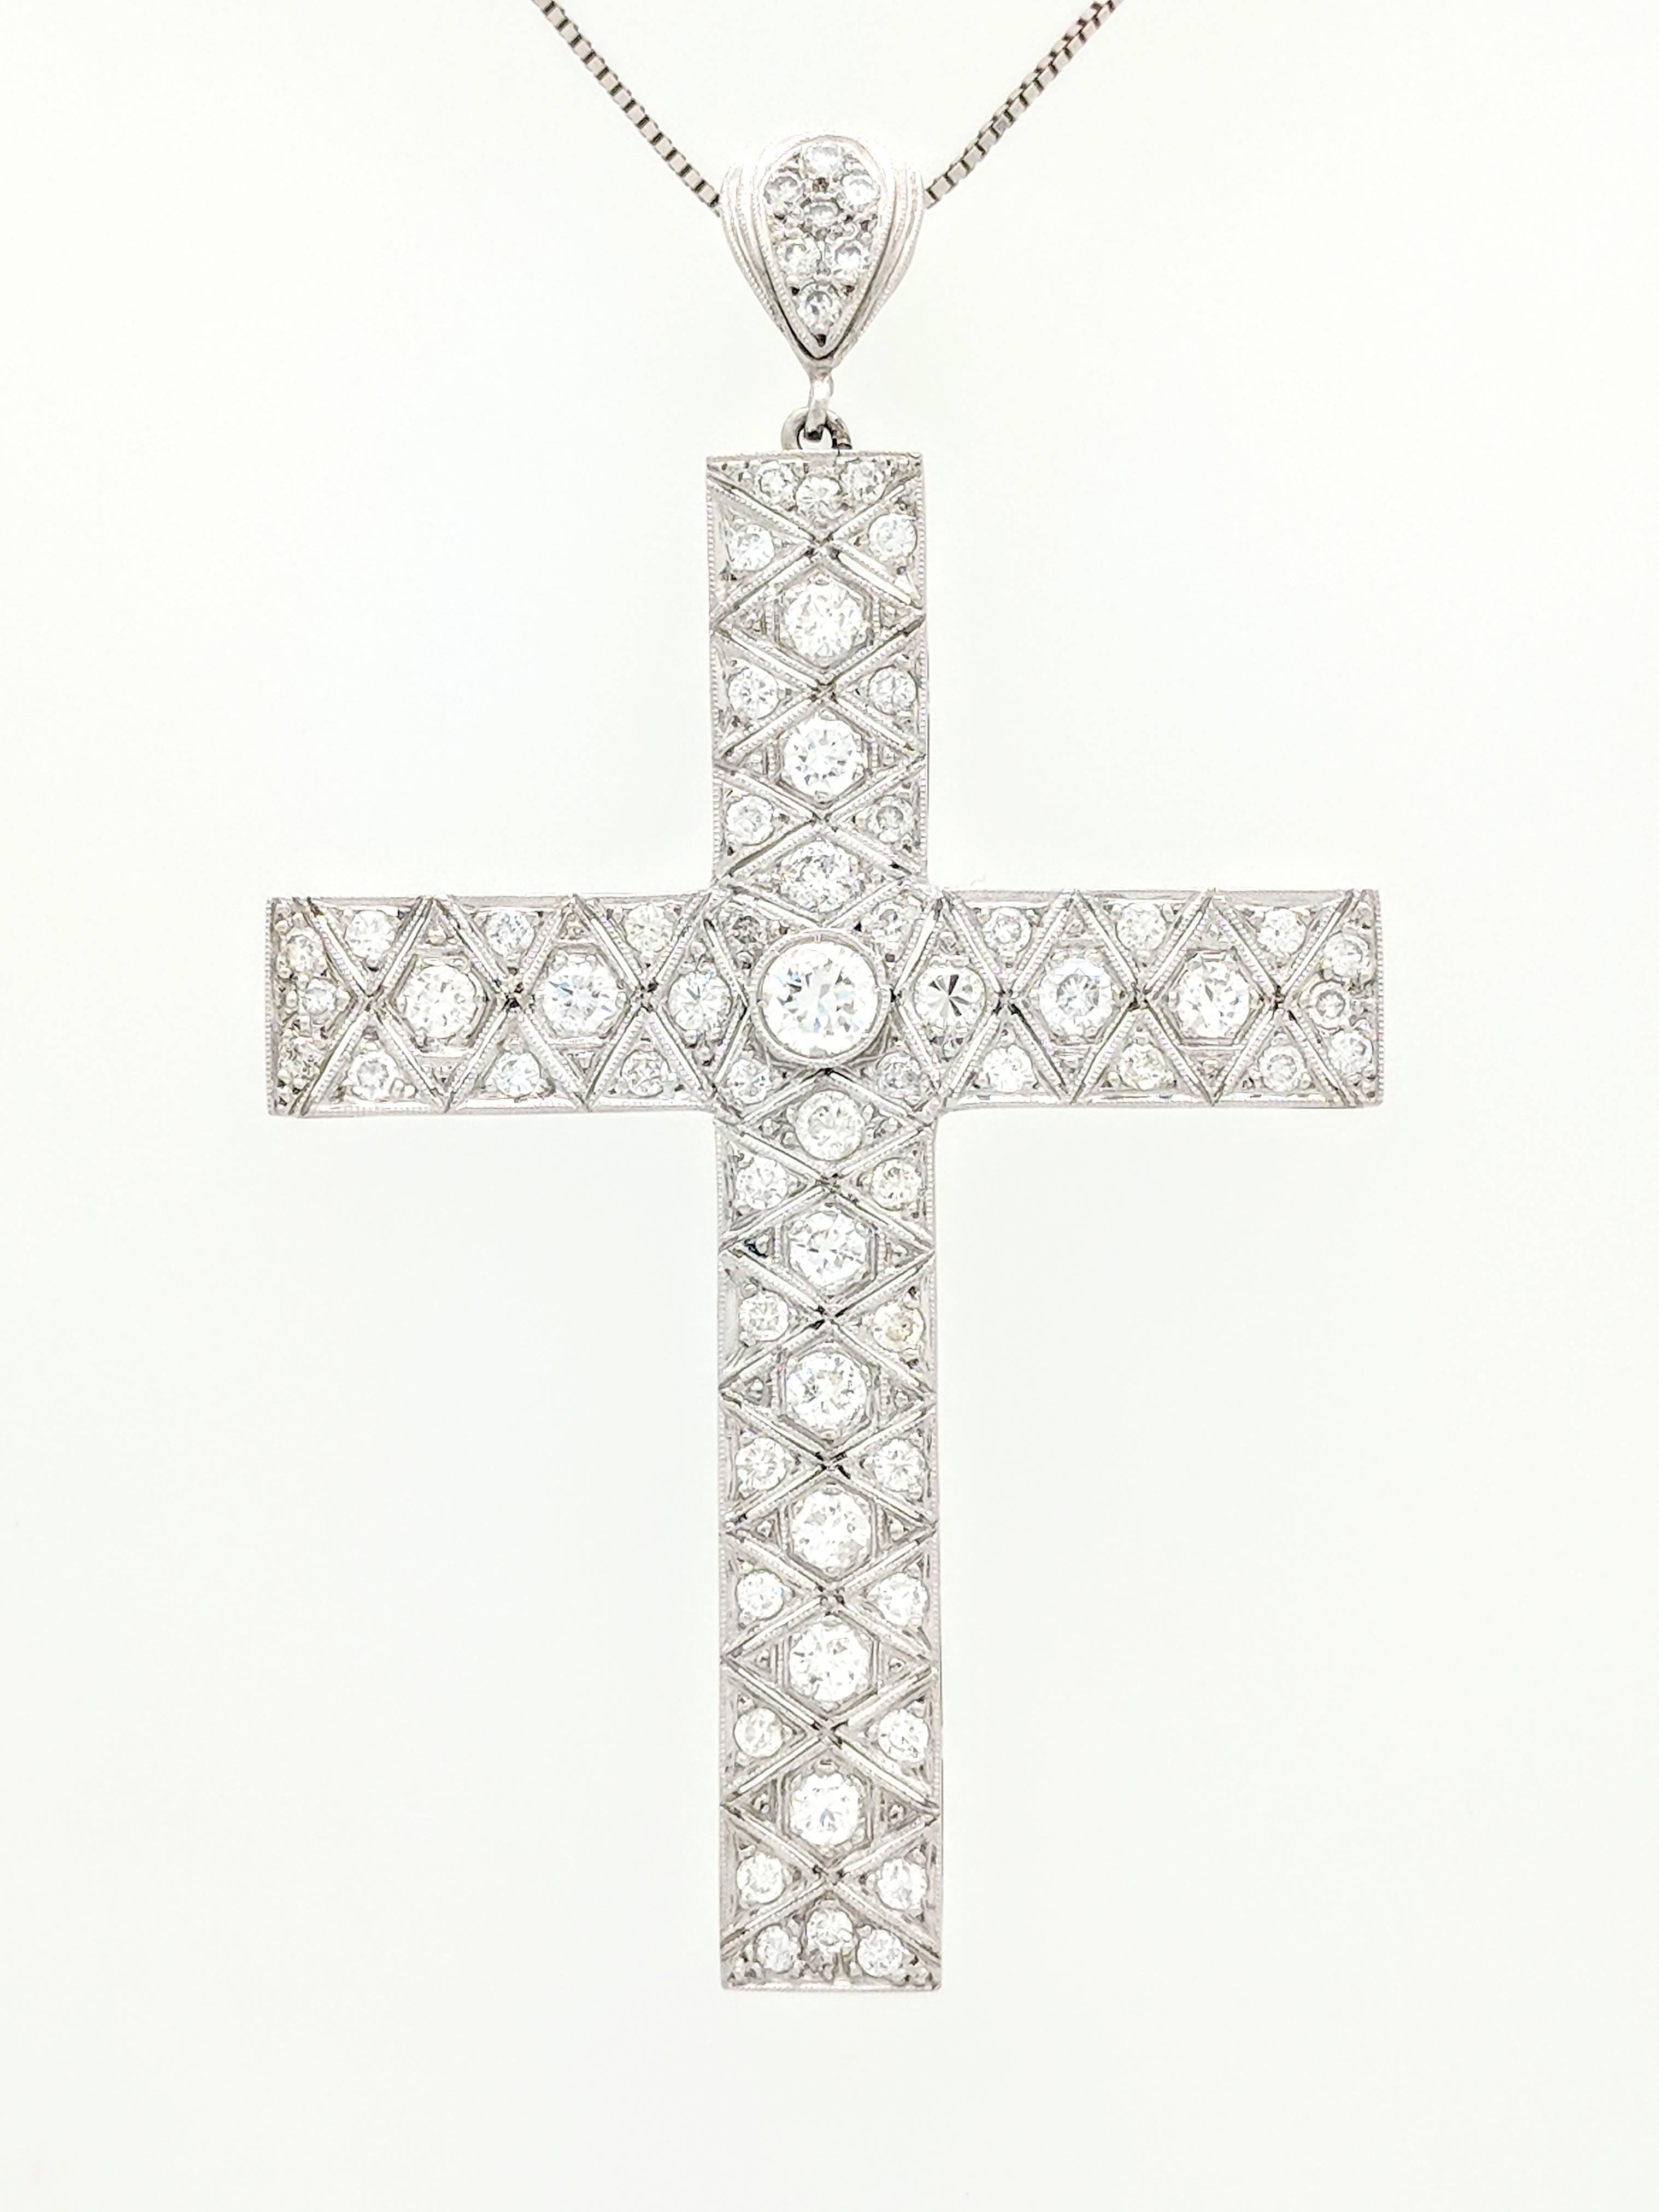  STUNNING Art Deco Filigree Platinum Diamond Cross Pendant Necklace

You are viewing a Stunning Art Deco Filigree Diamond Cross Pendant Necklace. The pendant is crafted from platinum and weighs 8.4 grams. It features one bezel set .40 carat round